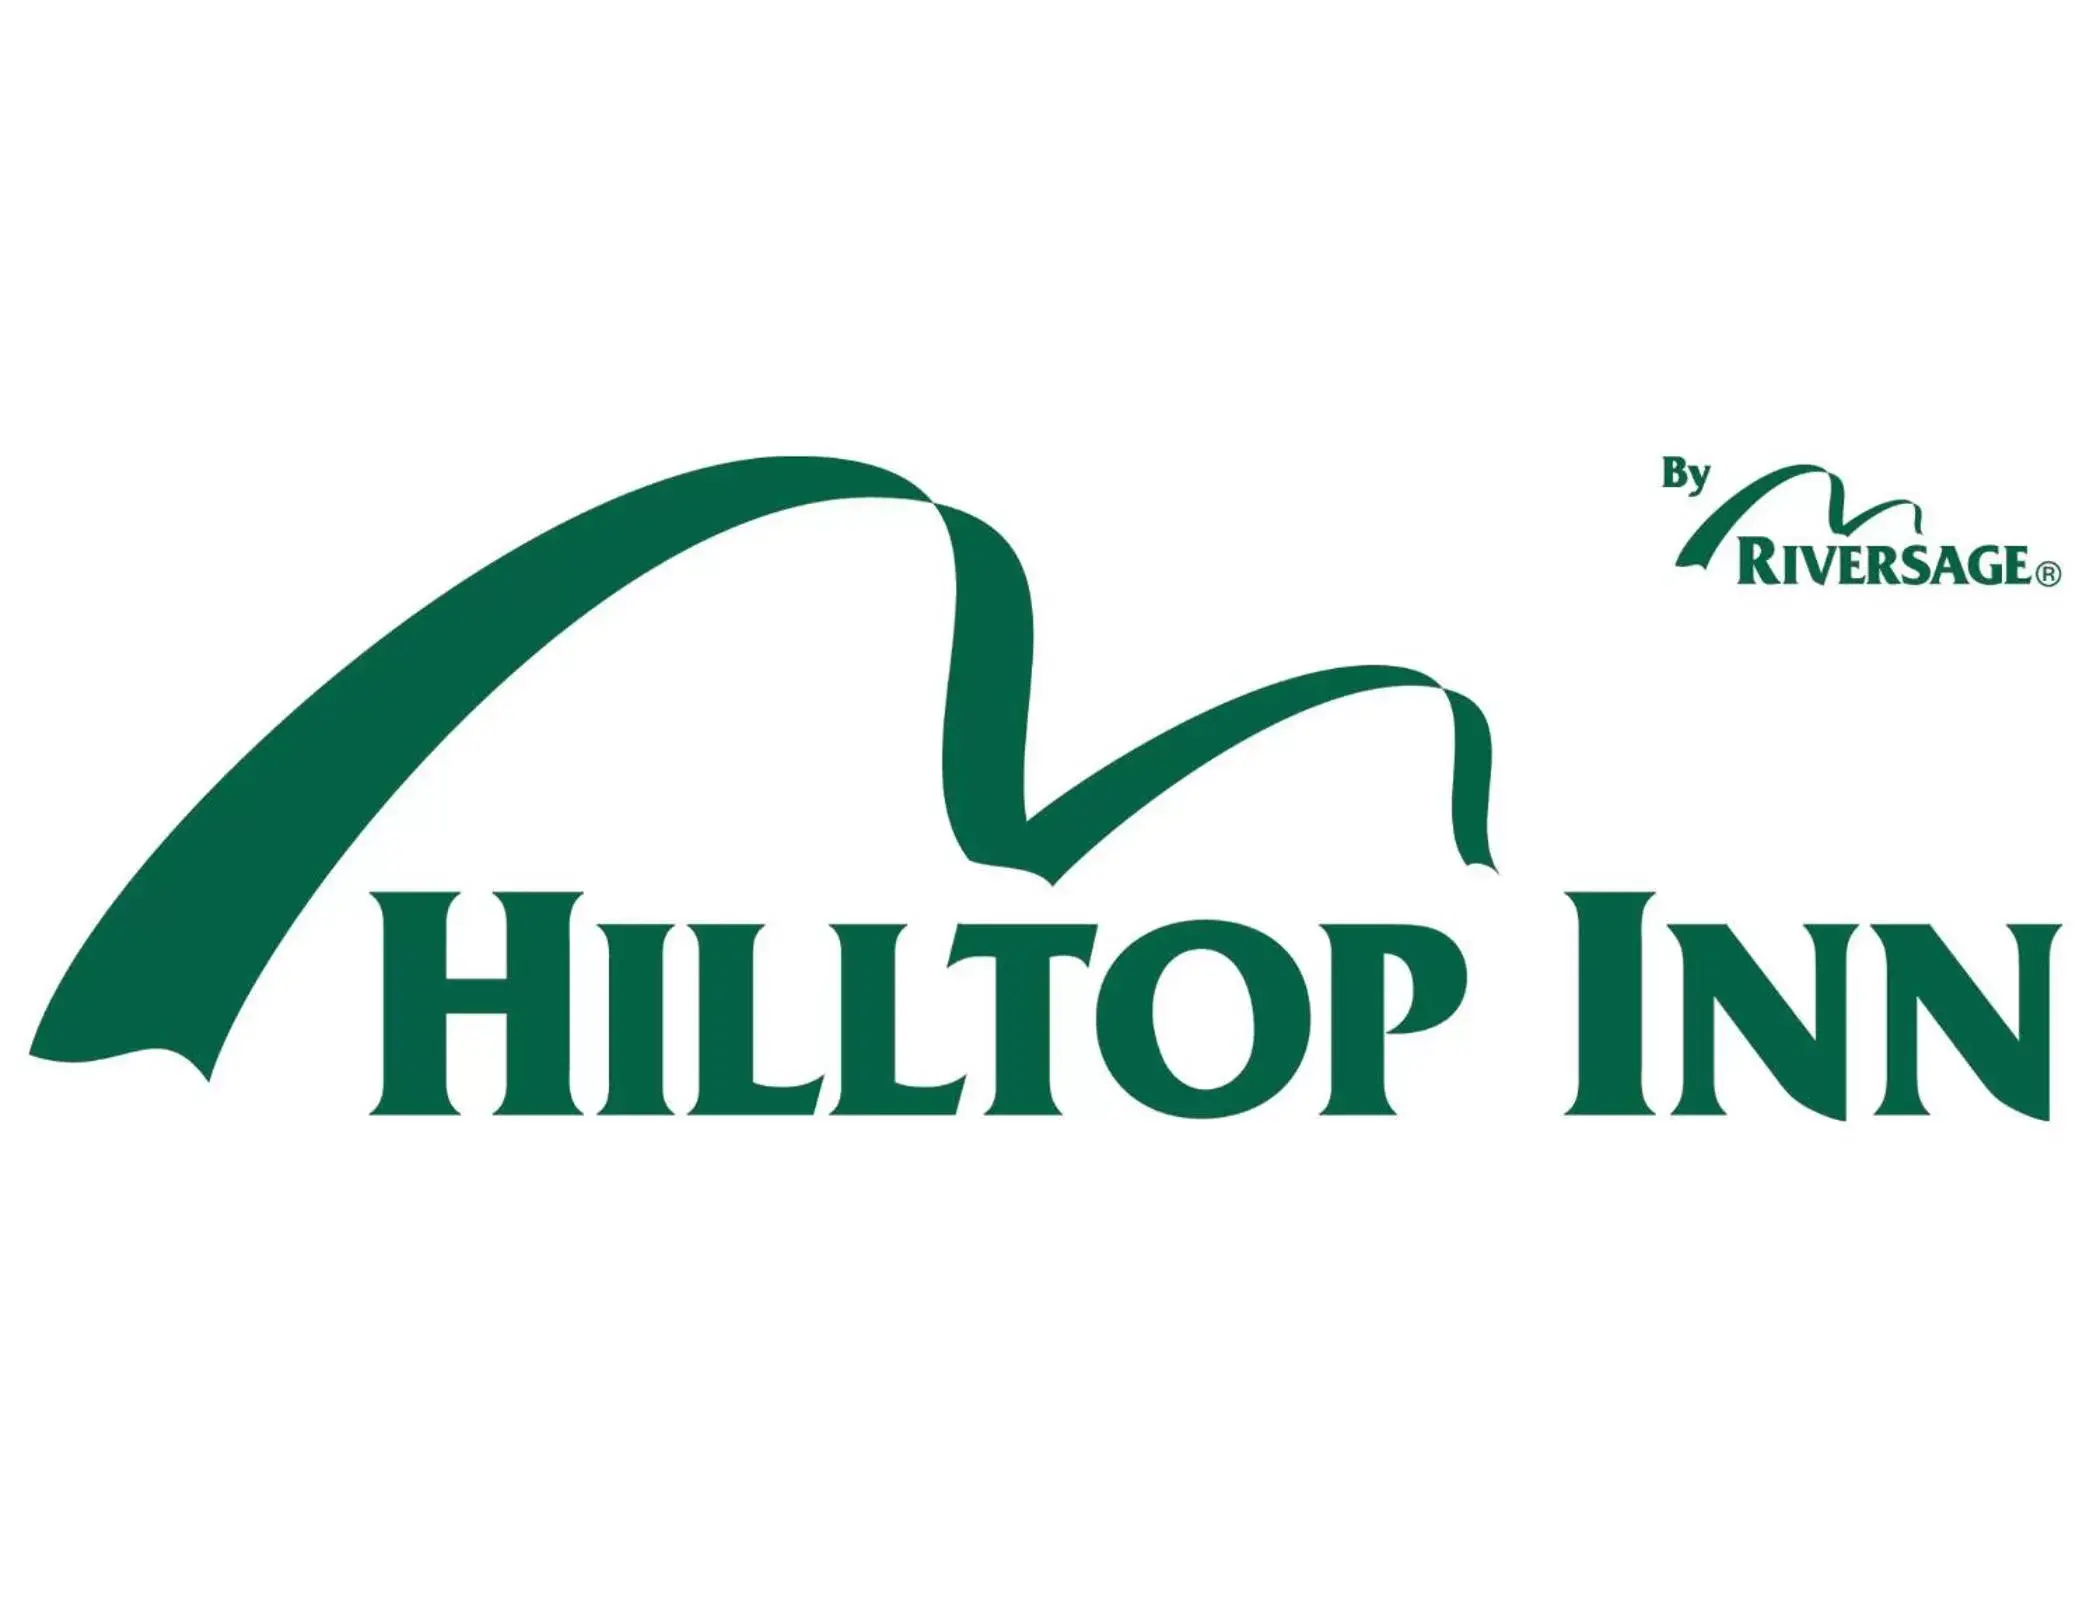 Property logo or sign in Hilltop Inn by Riversage